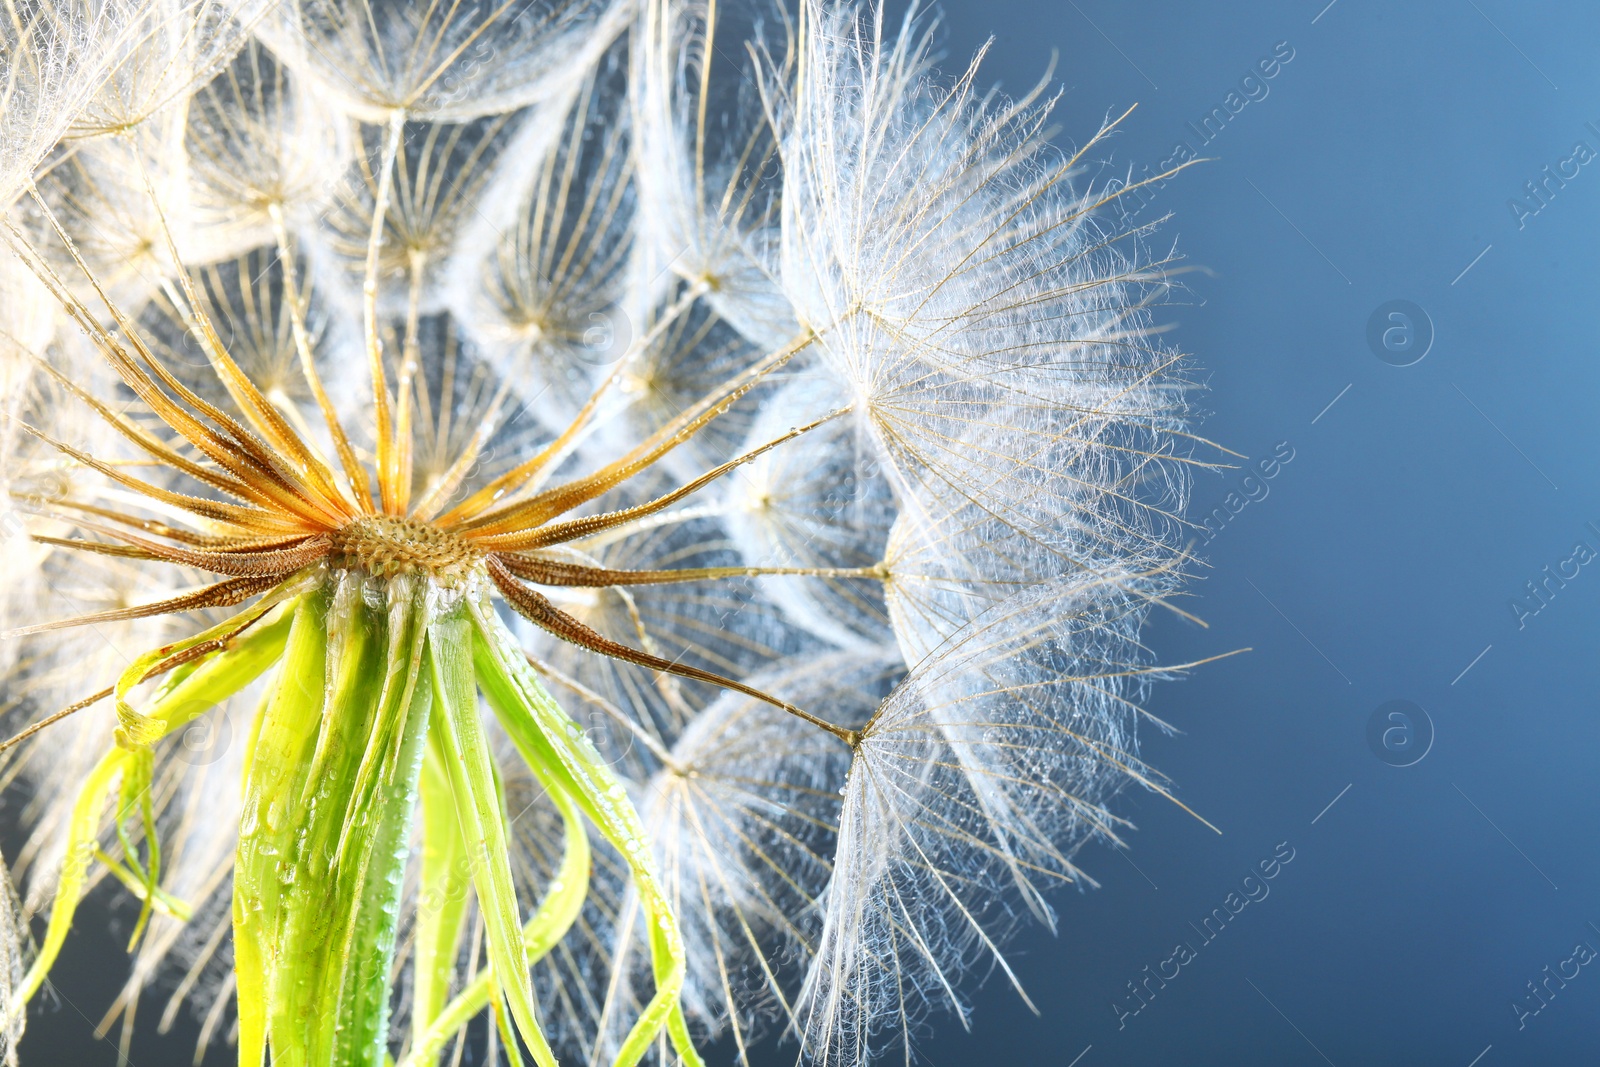 Photo of Dandelion seed head with dew drops on color background, close up